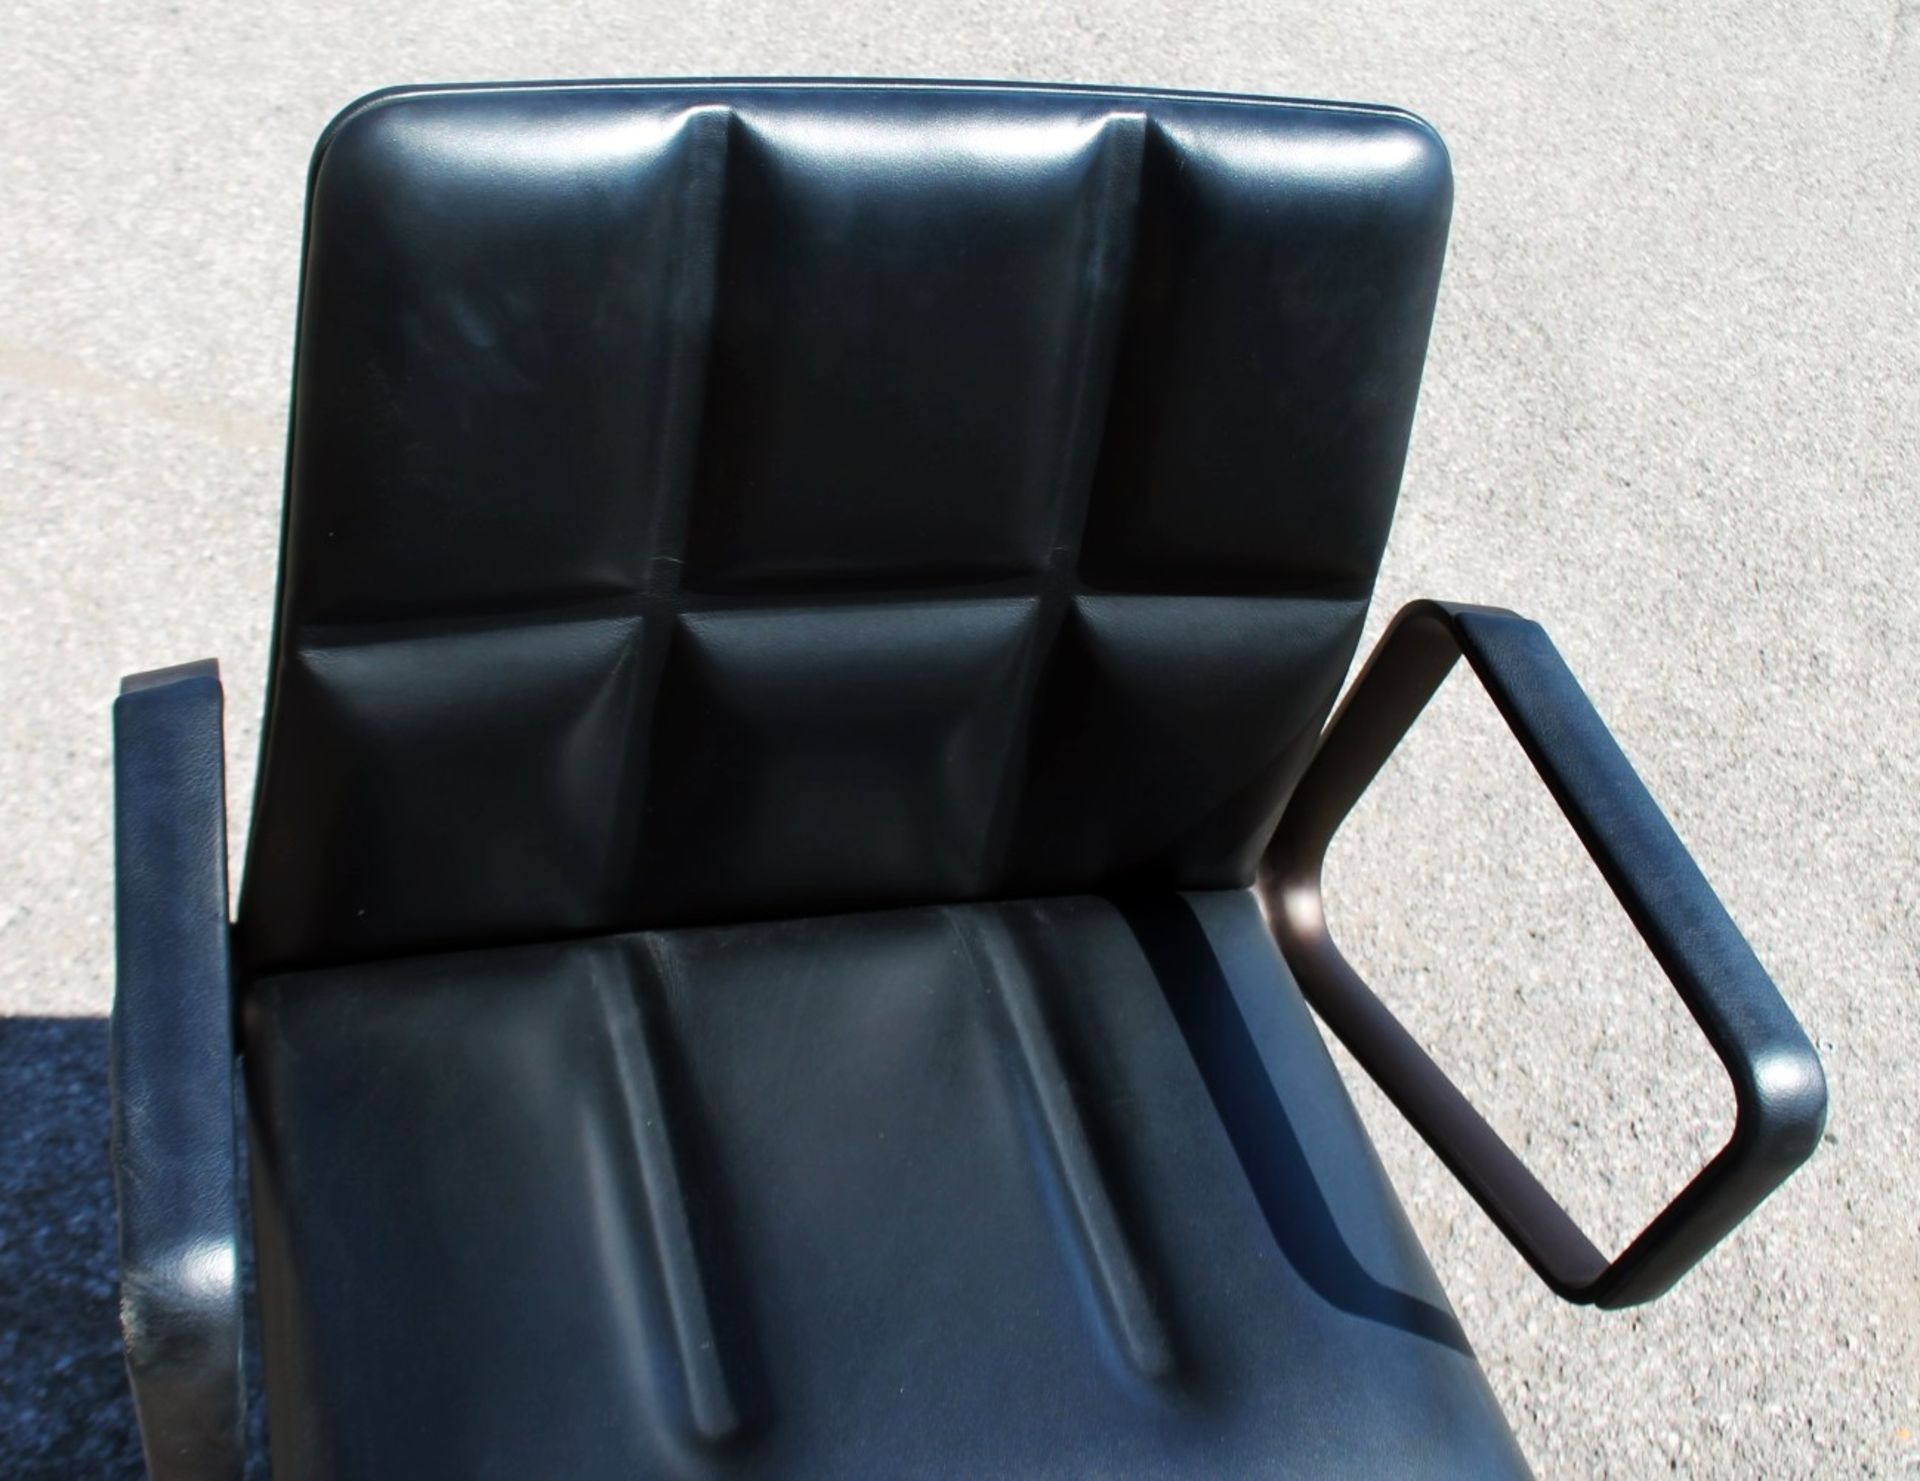 1 x WALTER KNOLL 'Leadchair' Executive Meeting Chair In Genuine Leather - Original RRP £4,250 - Image 7 of 9